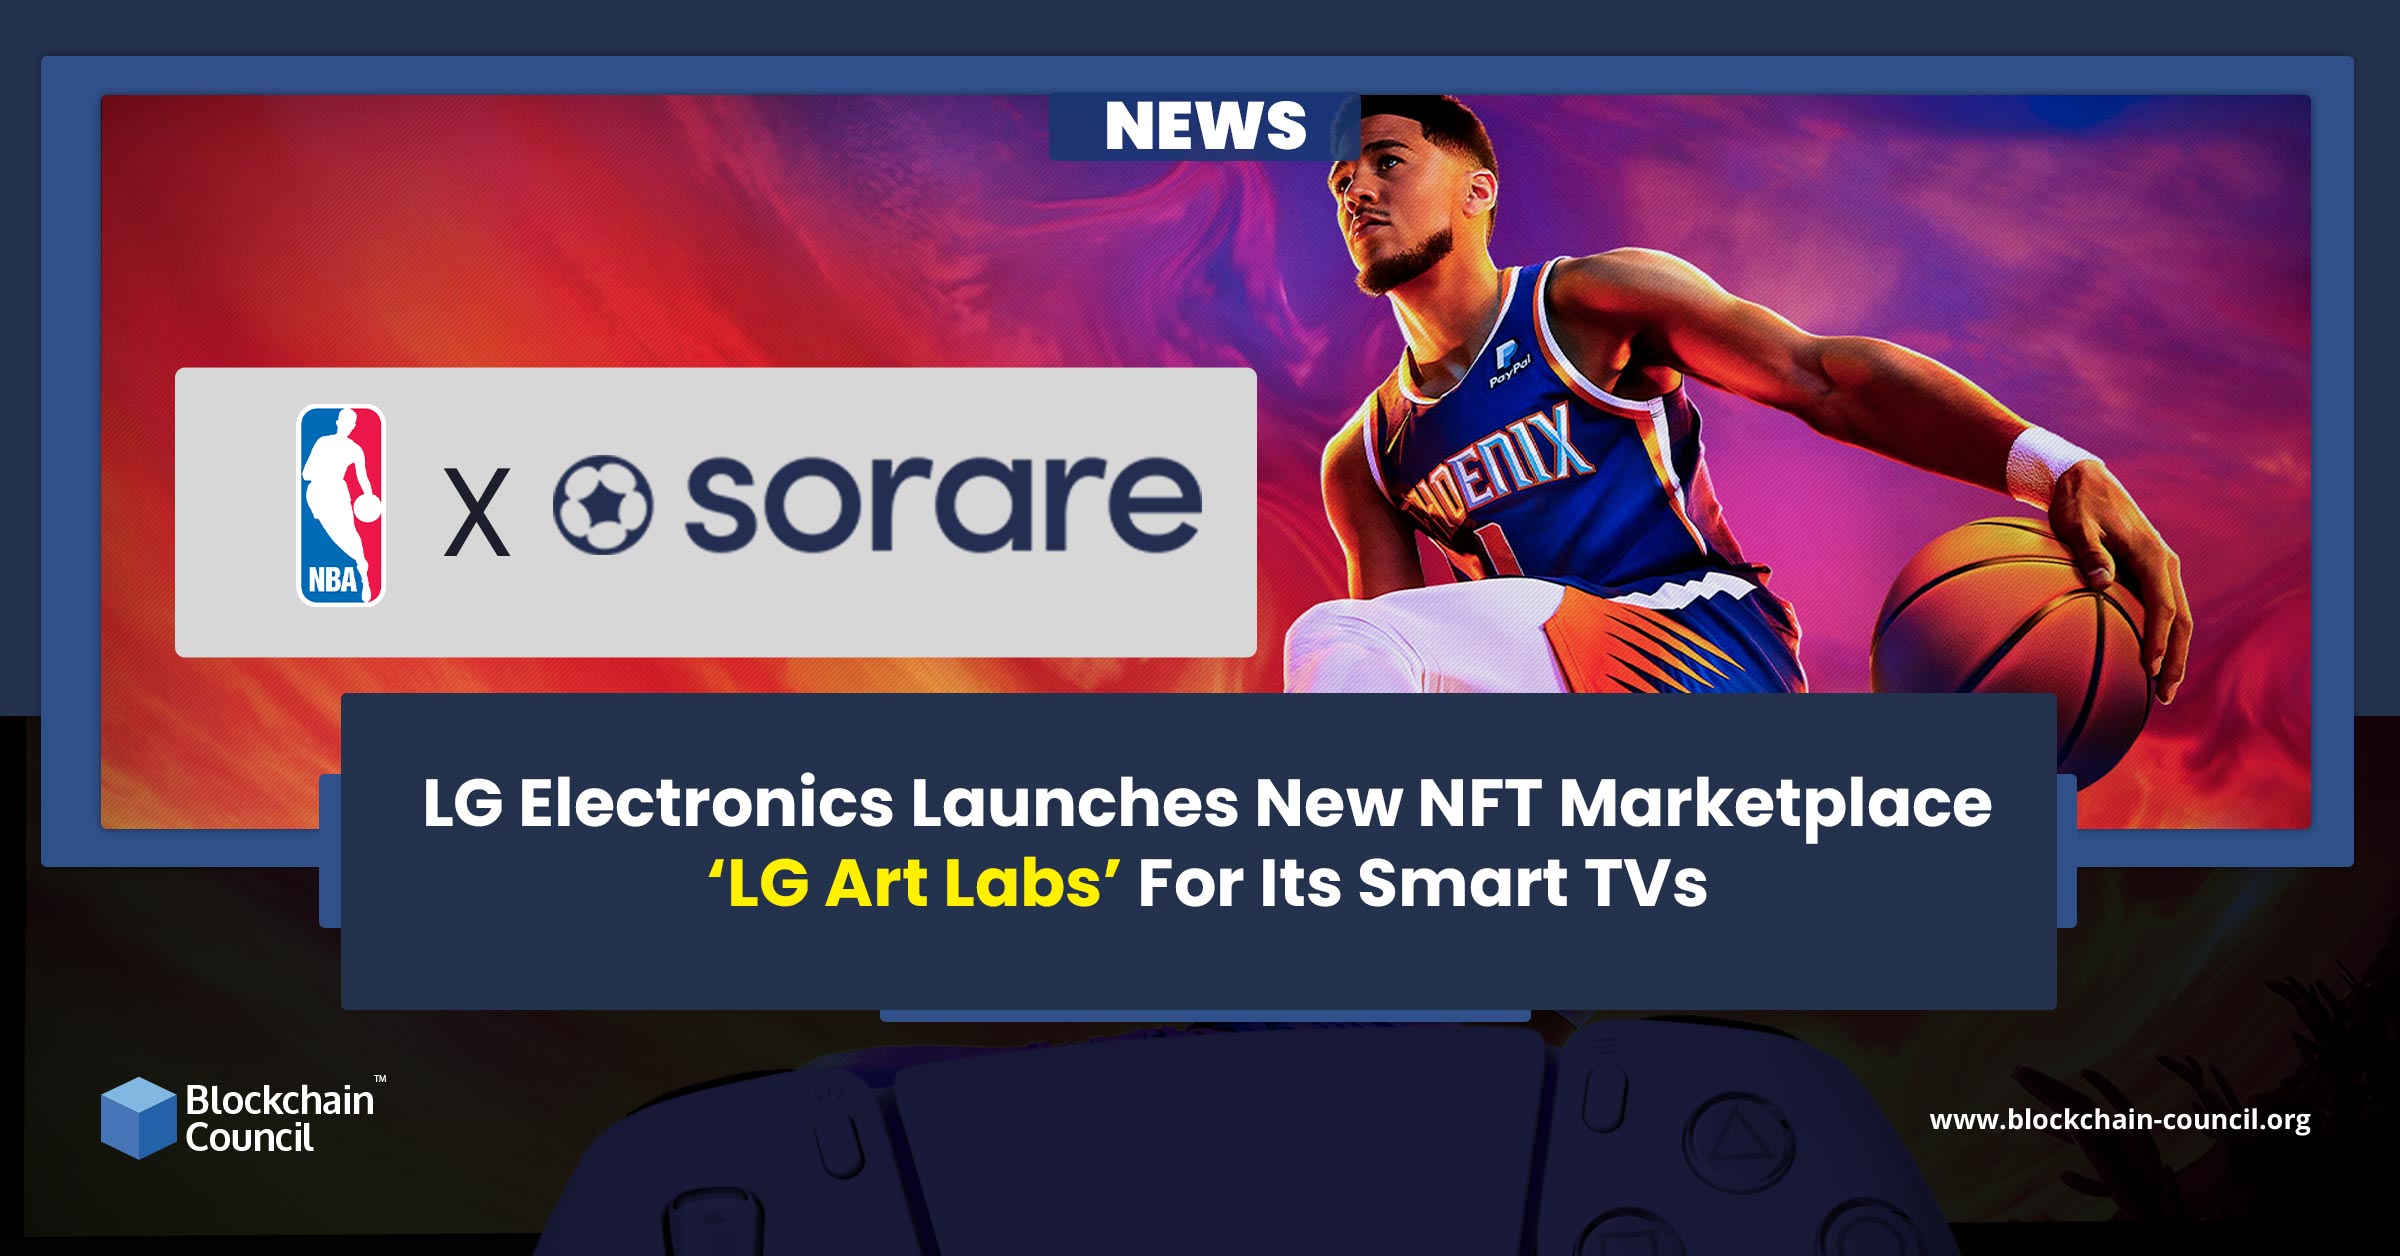 The NBA is increasing its web3 footprint with the recent announcement of a new relationship with NFT platform Sorare. The two will be constructing a brand-new fantasy gamified platform that will debut sometime in 2019. We'll examine what we can infer from the parties' joint first look announcement, how it might affect the NBA's current NFT partnership with Dapper Labs, and what to watch out for as this story unfolds. According to a press release from the NBA that was distributed this morning, the NBAPA and the league have secured Sorare as their first-ever "official NFT fantasy partner." Terms of the multiyear agreement are not disclosed in the statement, but it is clarified that Sorare will focus on creating "the first legally licensed, free-to-play digital collectible-based fantasy basketball game," which could be released as soon as this fall. The NBA preseason begins later this month, with the regular season beginning in just over 30 days. Sorare began in European football, fusing the ideas of NFTs and fantasy sports. The platform has developed a good reputation with a number of teams and is the market leader in creating fantasy sports on a blockchain. Sorare's football league now includes close to 300 clubs from a variety of sizes and regions. It was announced earlier this year that the platform's entry into the main American sports earlier this year through a partnership with Major League Baseball. Baseball's 30 major league teams were given full IP access as part of the agreement, and a fantasy-style competition is anticipated here as well. Another NFT game with a fantasy theme is called "Rivals," and Sorare is collaborating with the NFL to release it. Should Dapper Labs be concerned about a potential new American competition now that a new NBA deal has been established? It's not all bad news for Dapper because competition leads to better products. Supporters of NBA Top Shot contend that Sorare and Top Shot can coexist, and this is probably accurate.